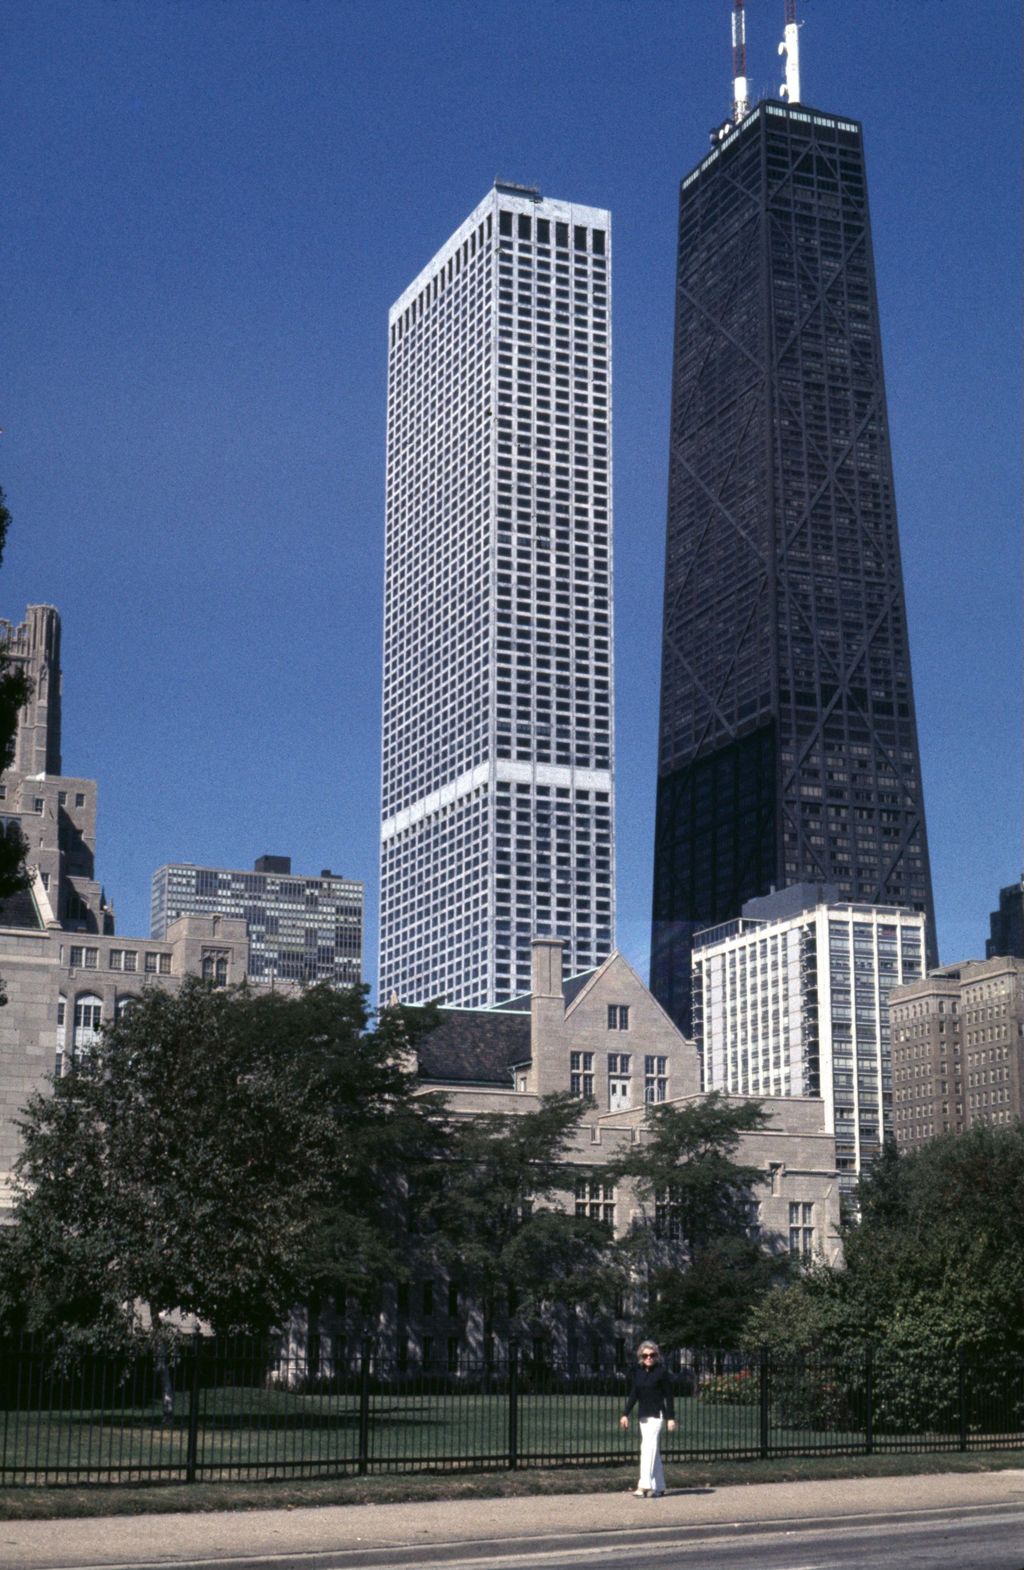 Miniature of Water Tower Place and John Hancock Center from Northwestern University-Chicago campus